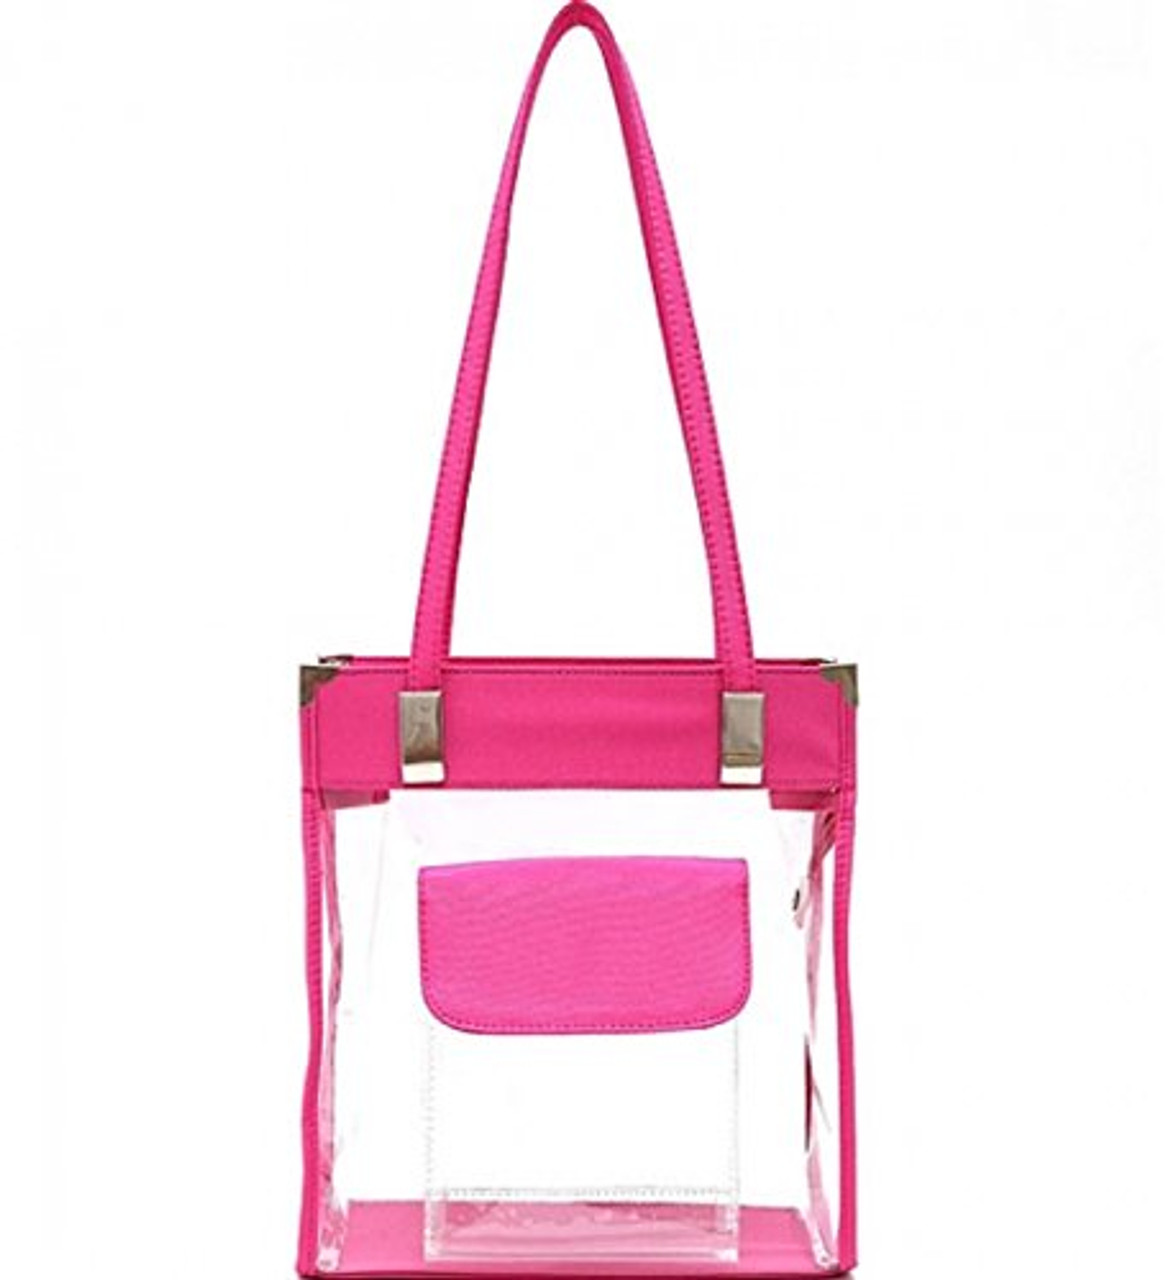 Pink Clear Purse with Front Pocket - Handbags, Bling & More!